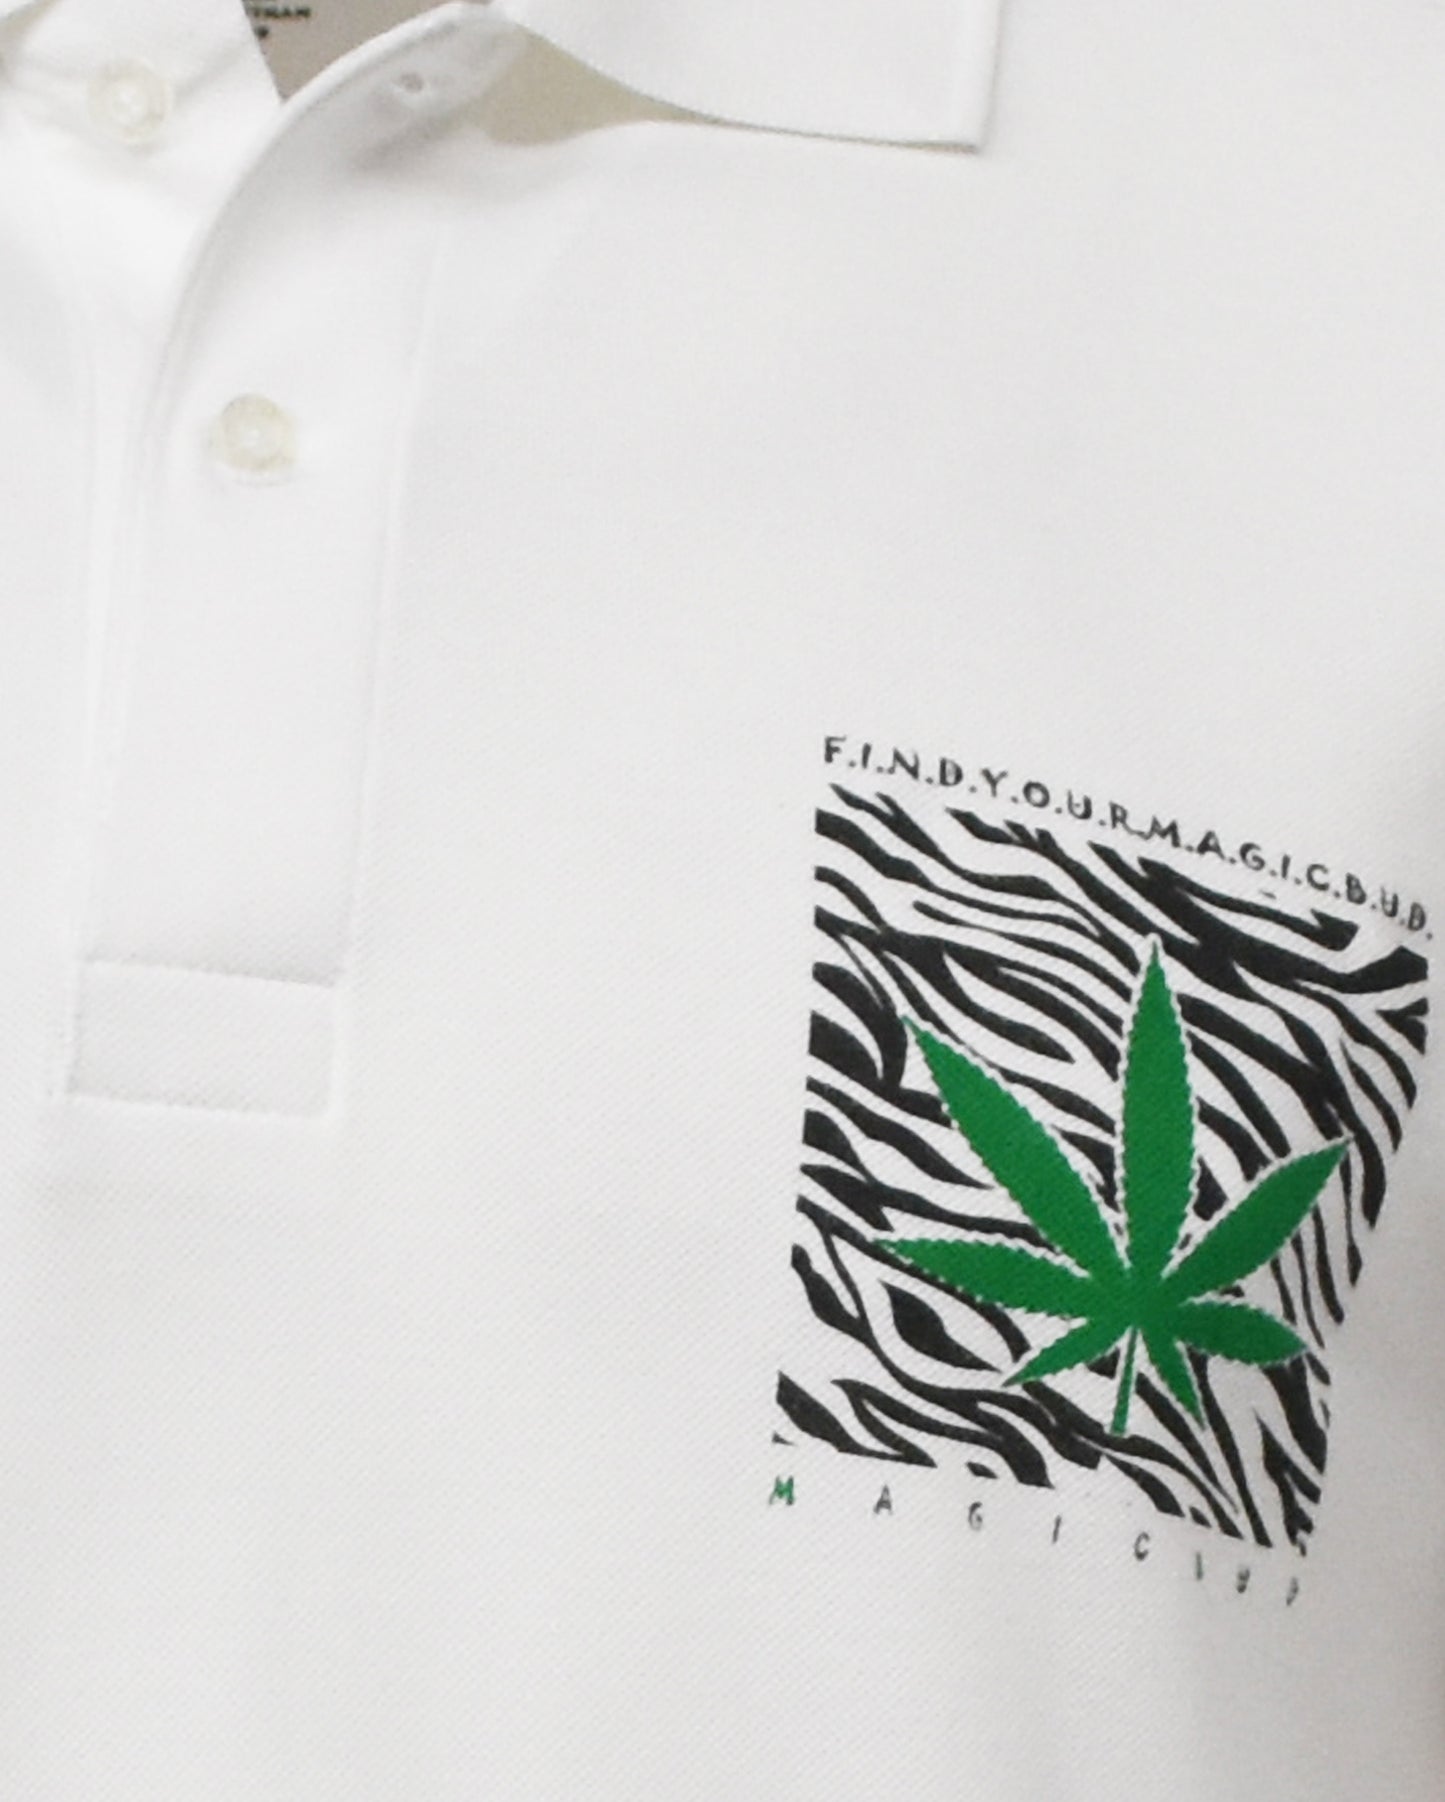 Men's Polo Shirt -420 Weed -Find Your Magic Bud - 5% Spandex - MB T shirts - NEW